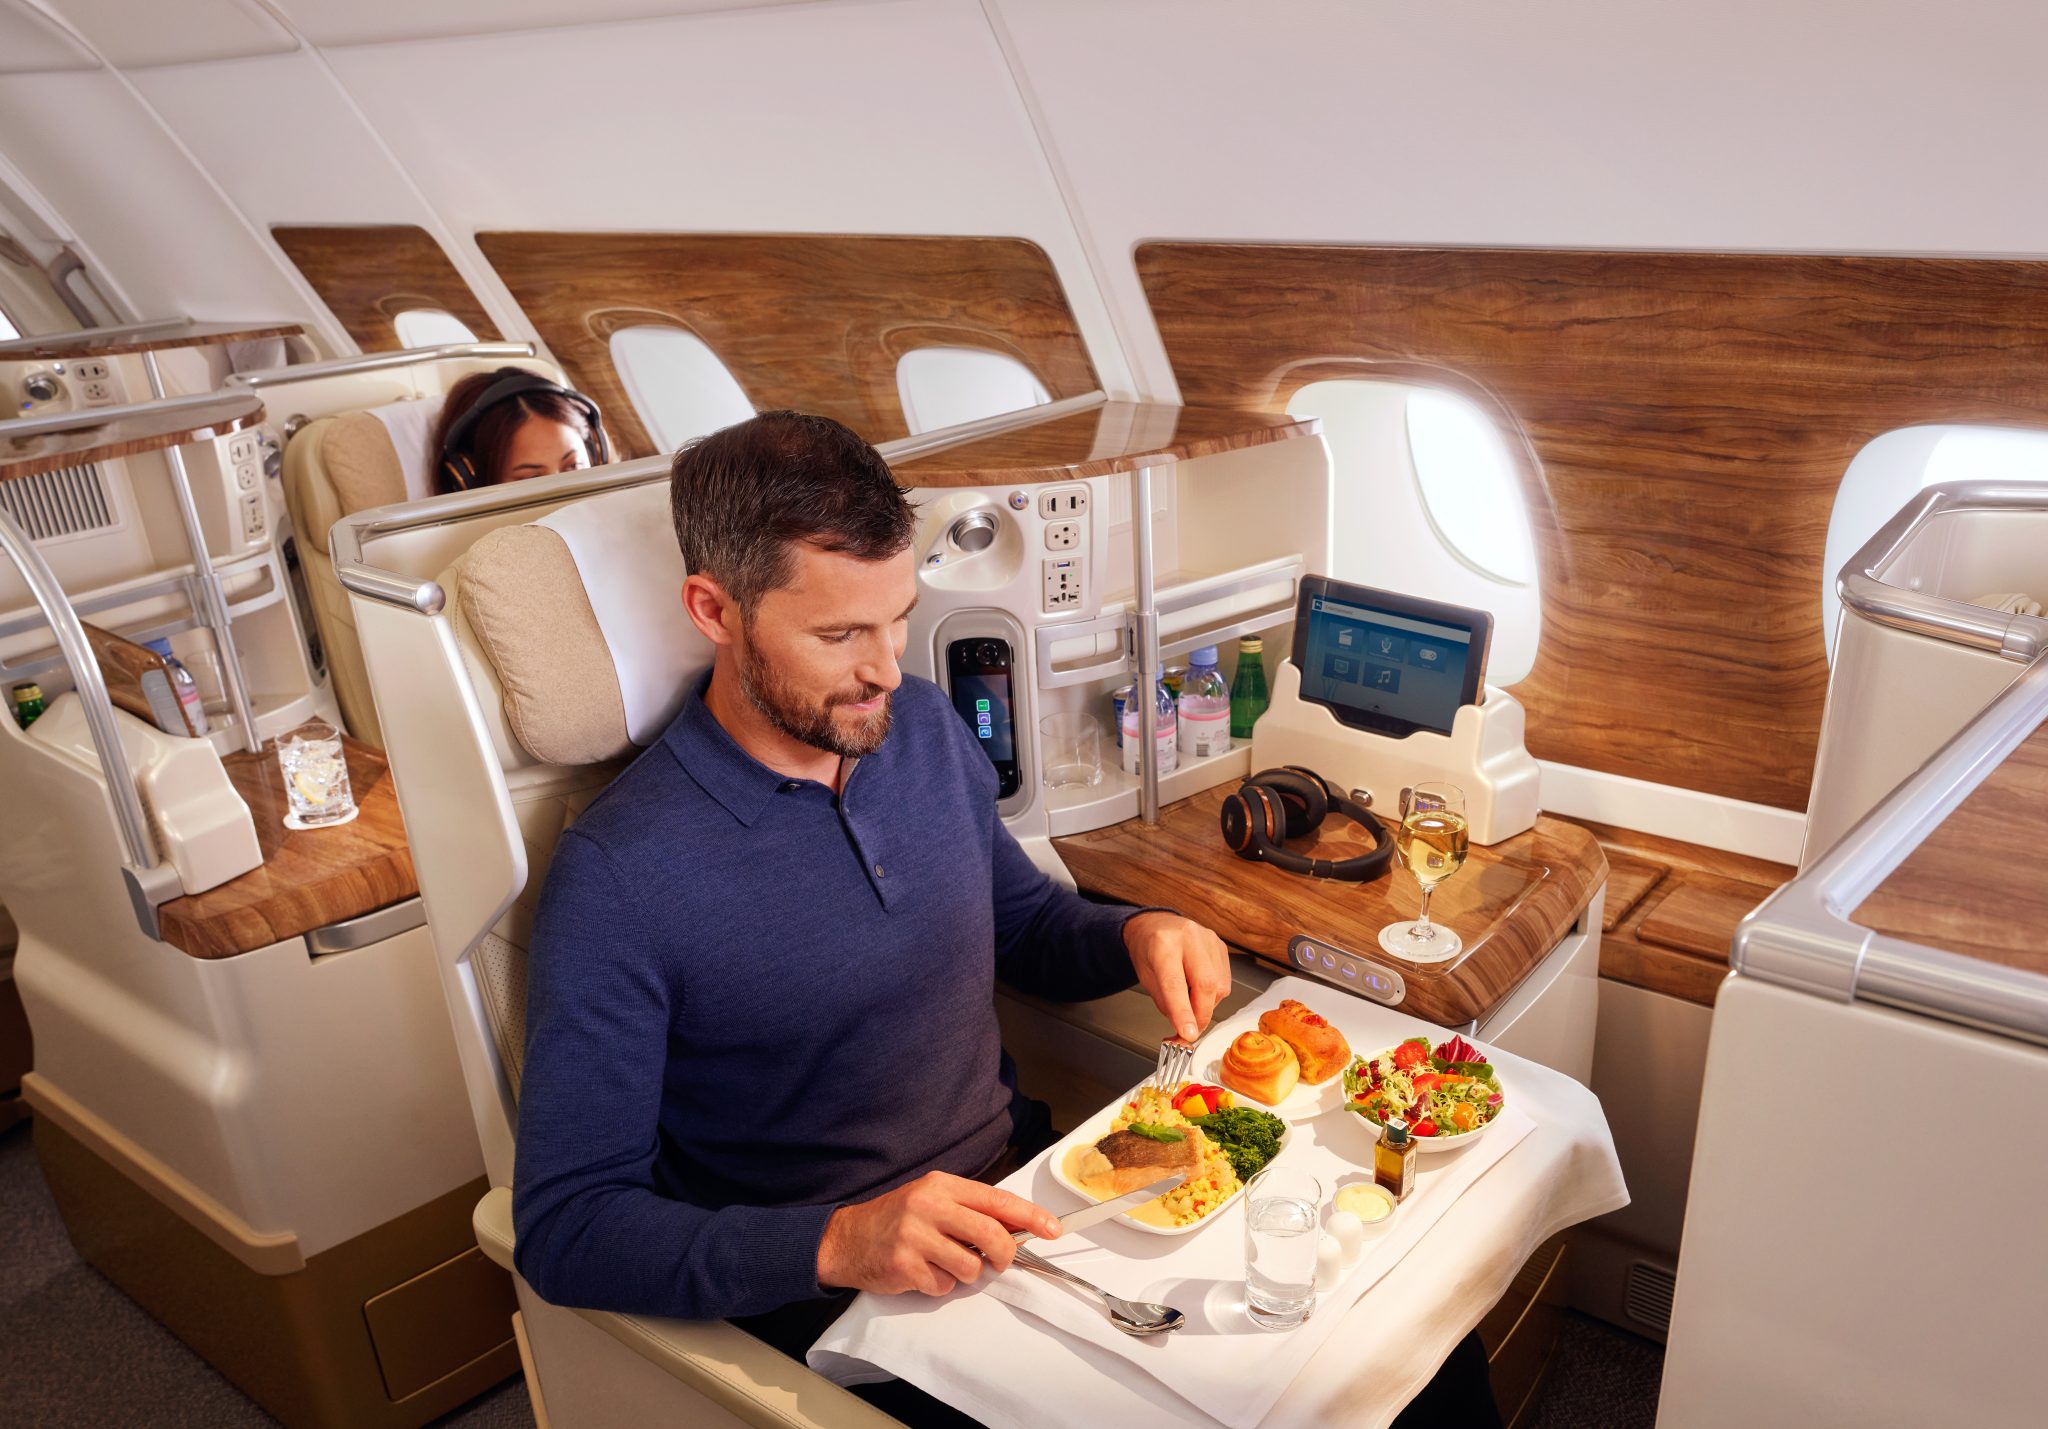 Emirates extends inflight meal preordering service